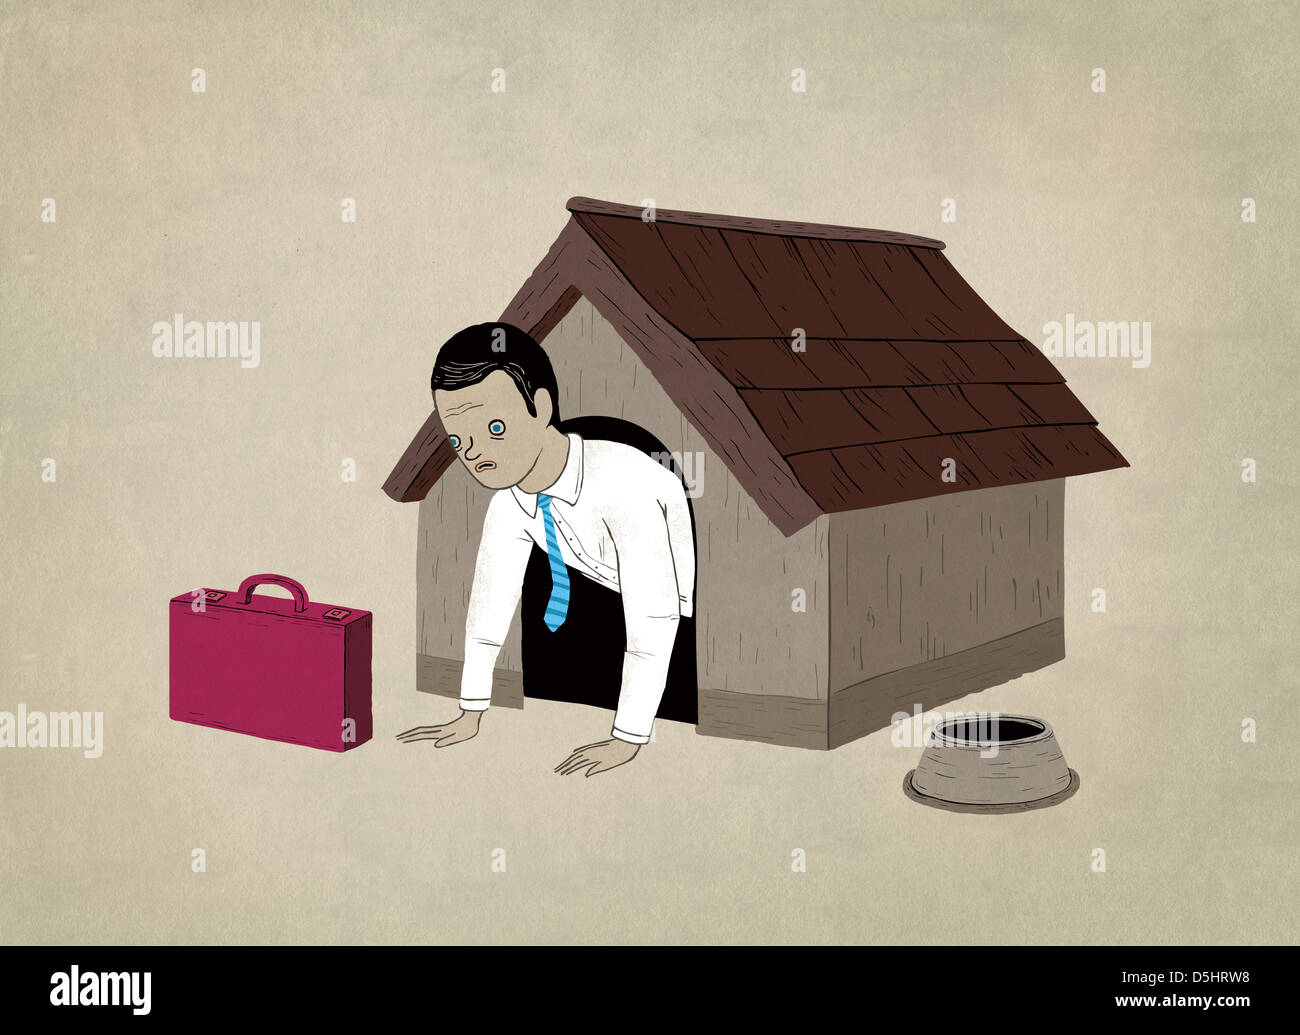 Illustrative image of businessman in dog house representing unemployment Stock Photo